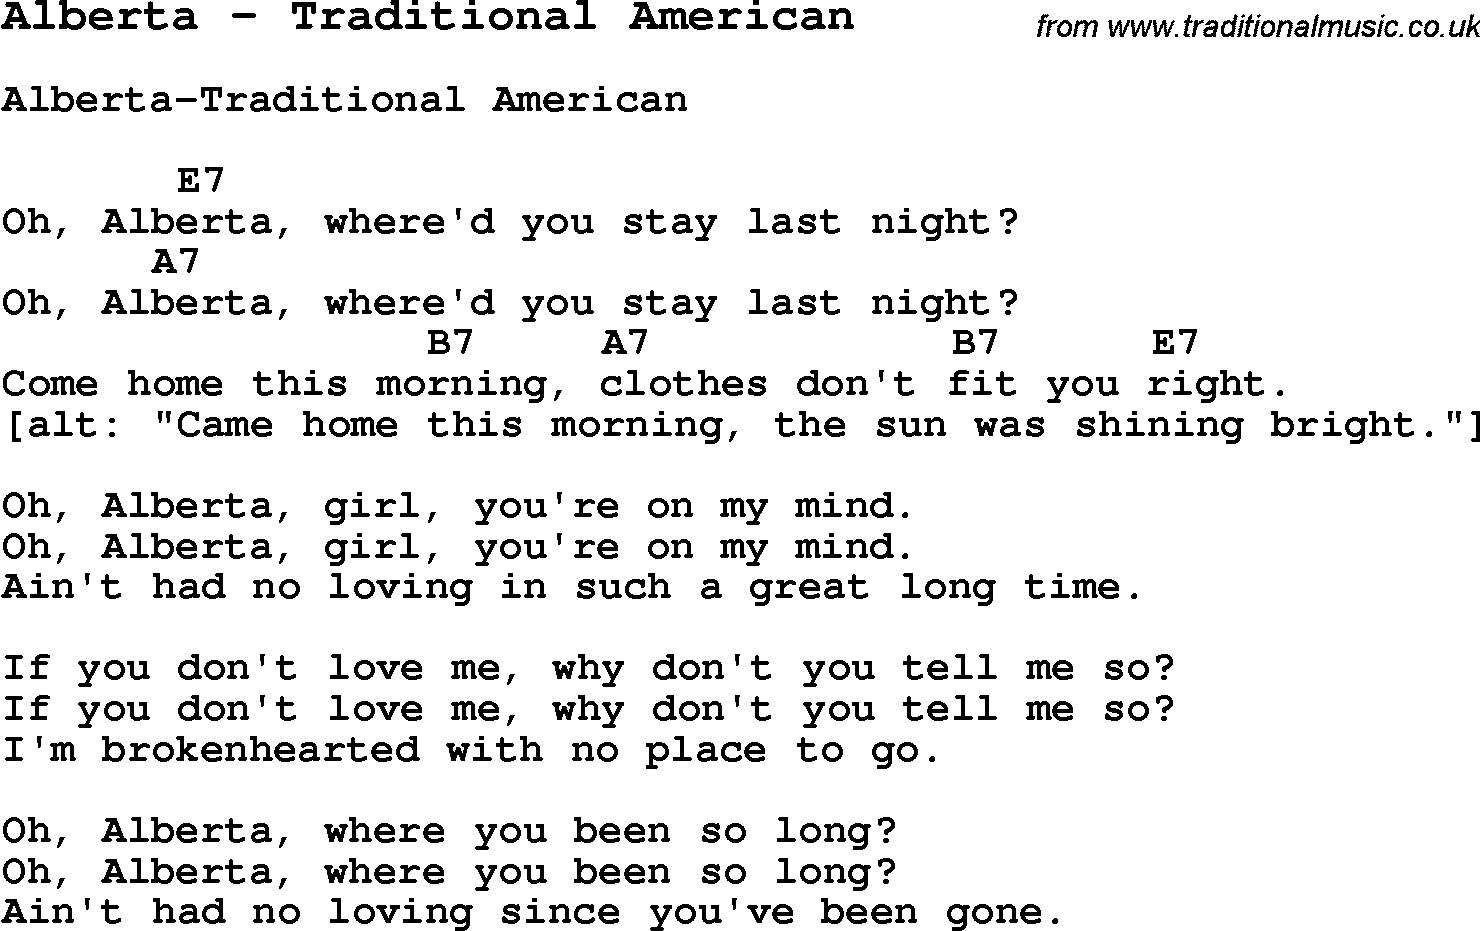 Song Alberta by Traditional American, with lyrics for vocal performance and accompaniment chords for Ukulele, Guitar Banjo etc.